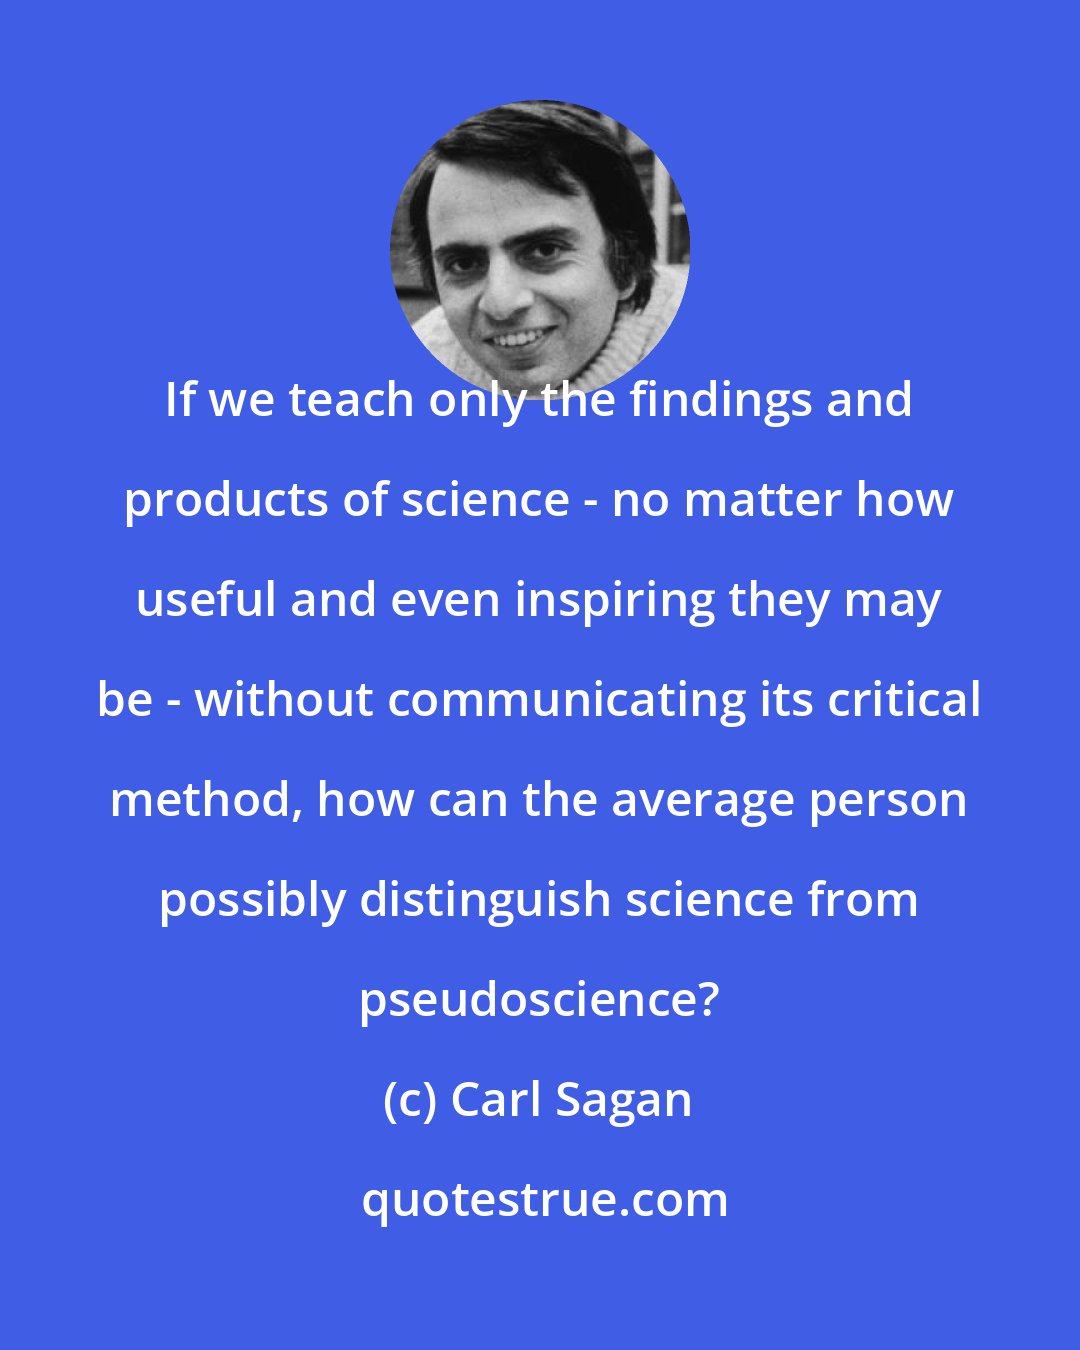 Carl Sagan: If we teach only the findings and products of science - no matter how useful and even inspiring they may be - without communicating its critical method, how can the average person possibly distinguish science from pseudoscience?